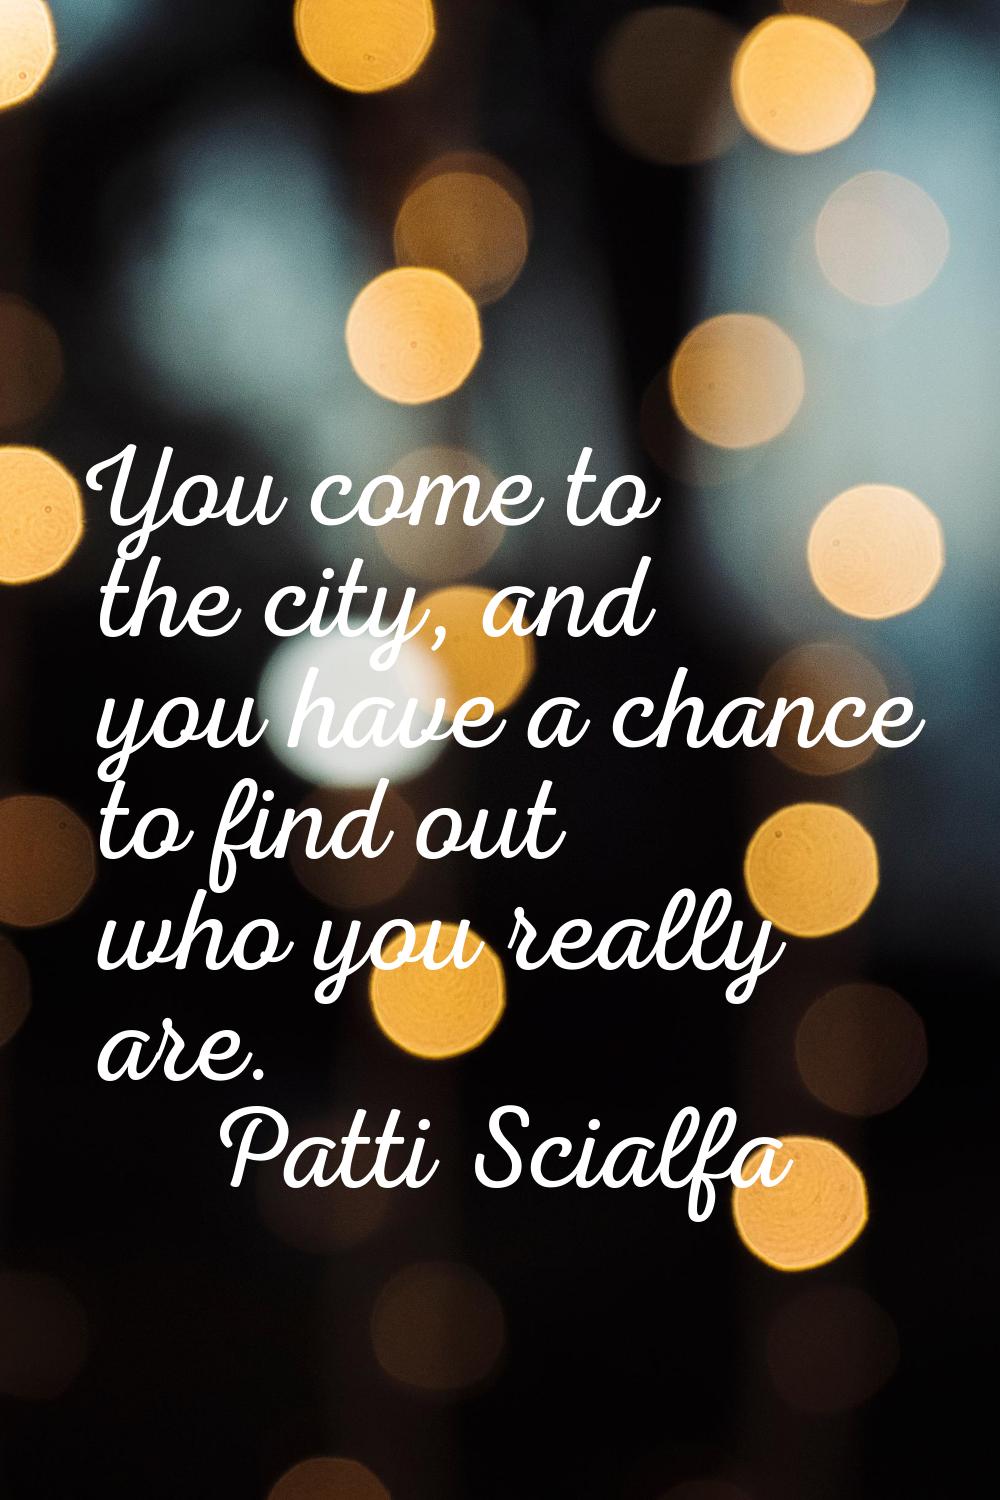 You come to the city, and you have a chance to find out who you really are.